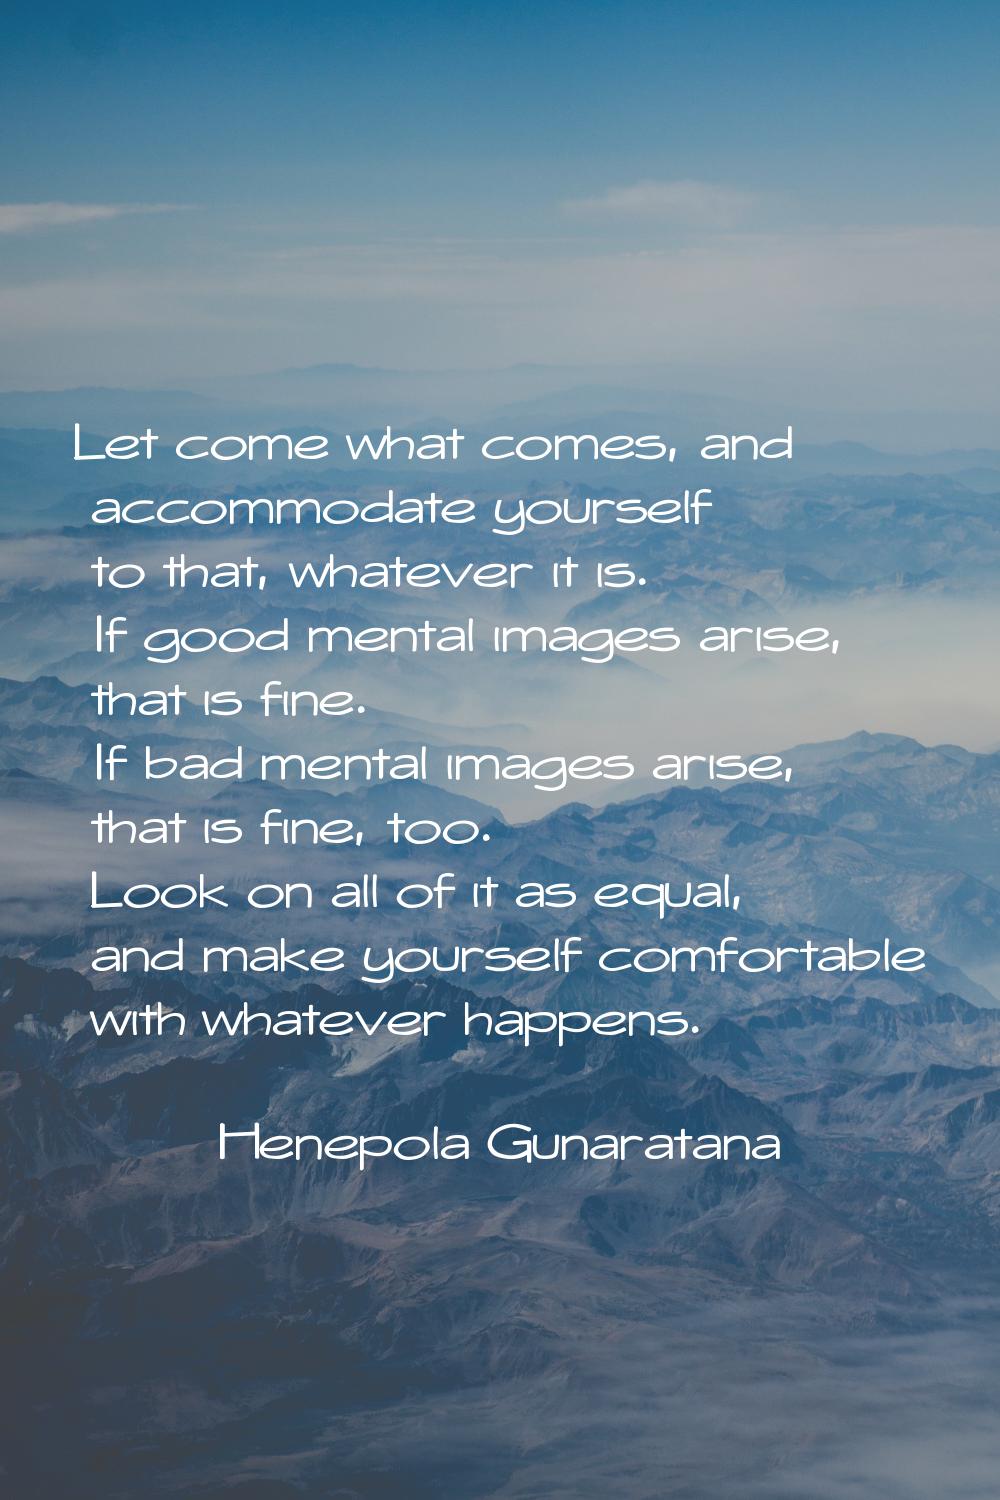 Let come what comes, and accommodate yourself to that, whatever it is. If good mental images arise,